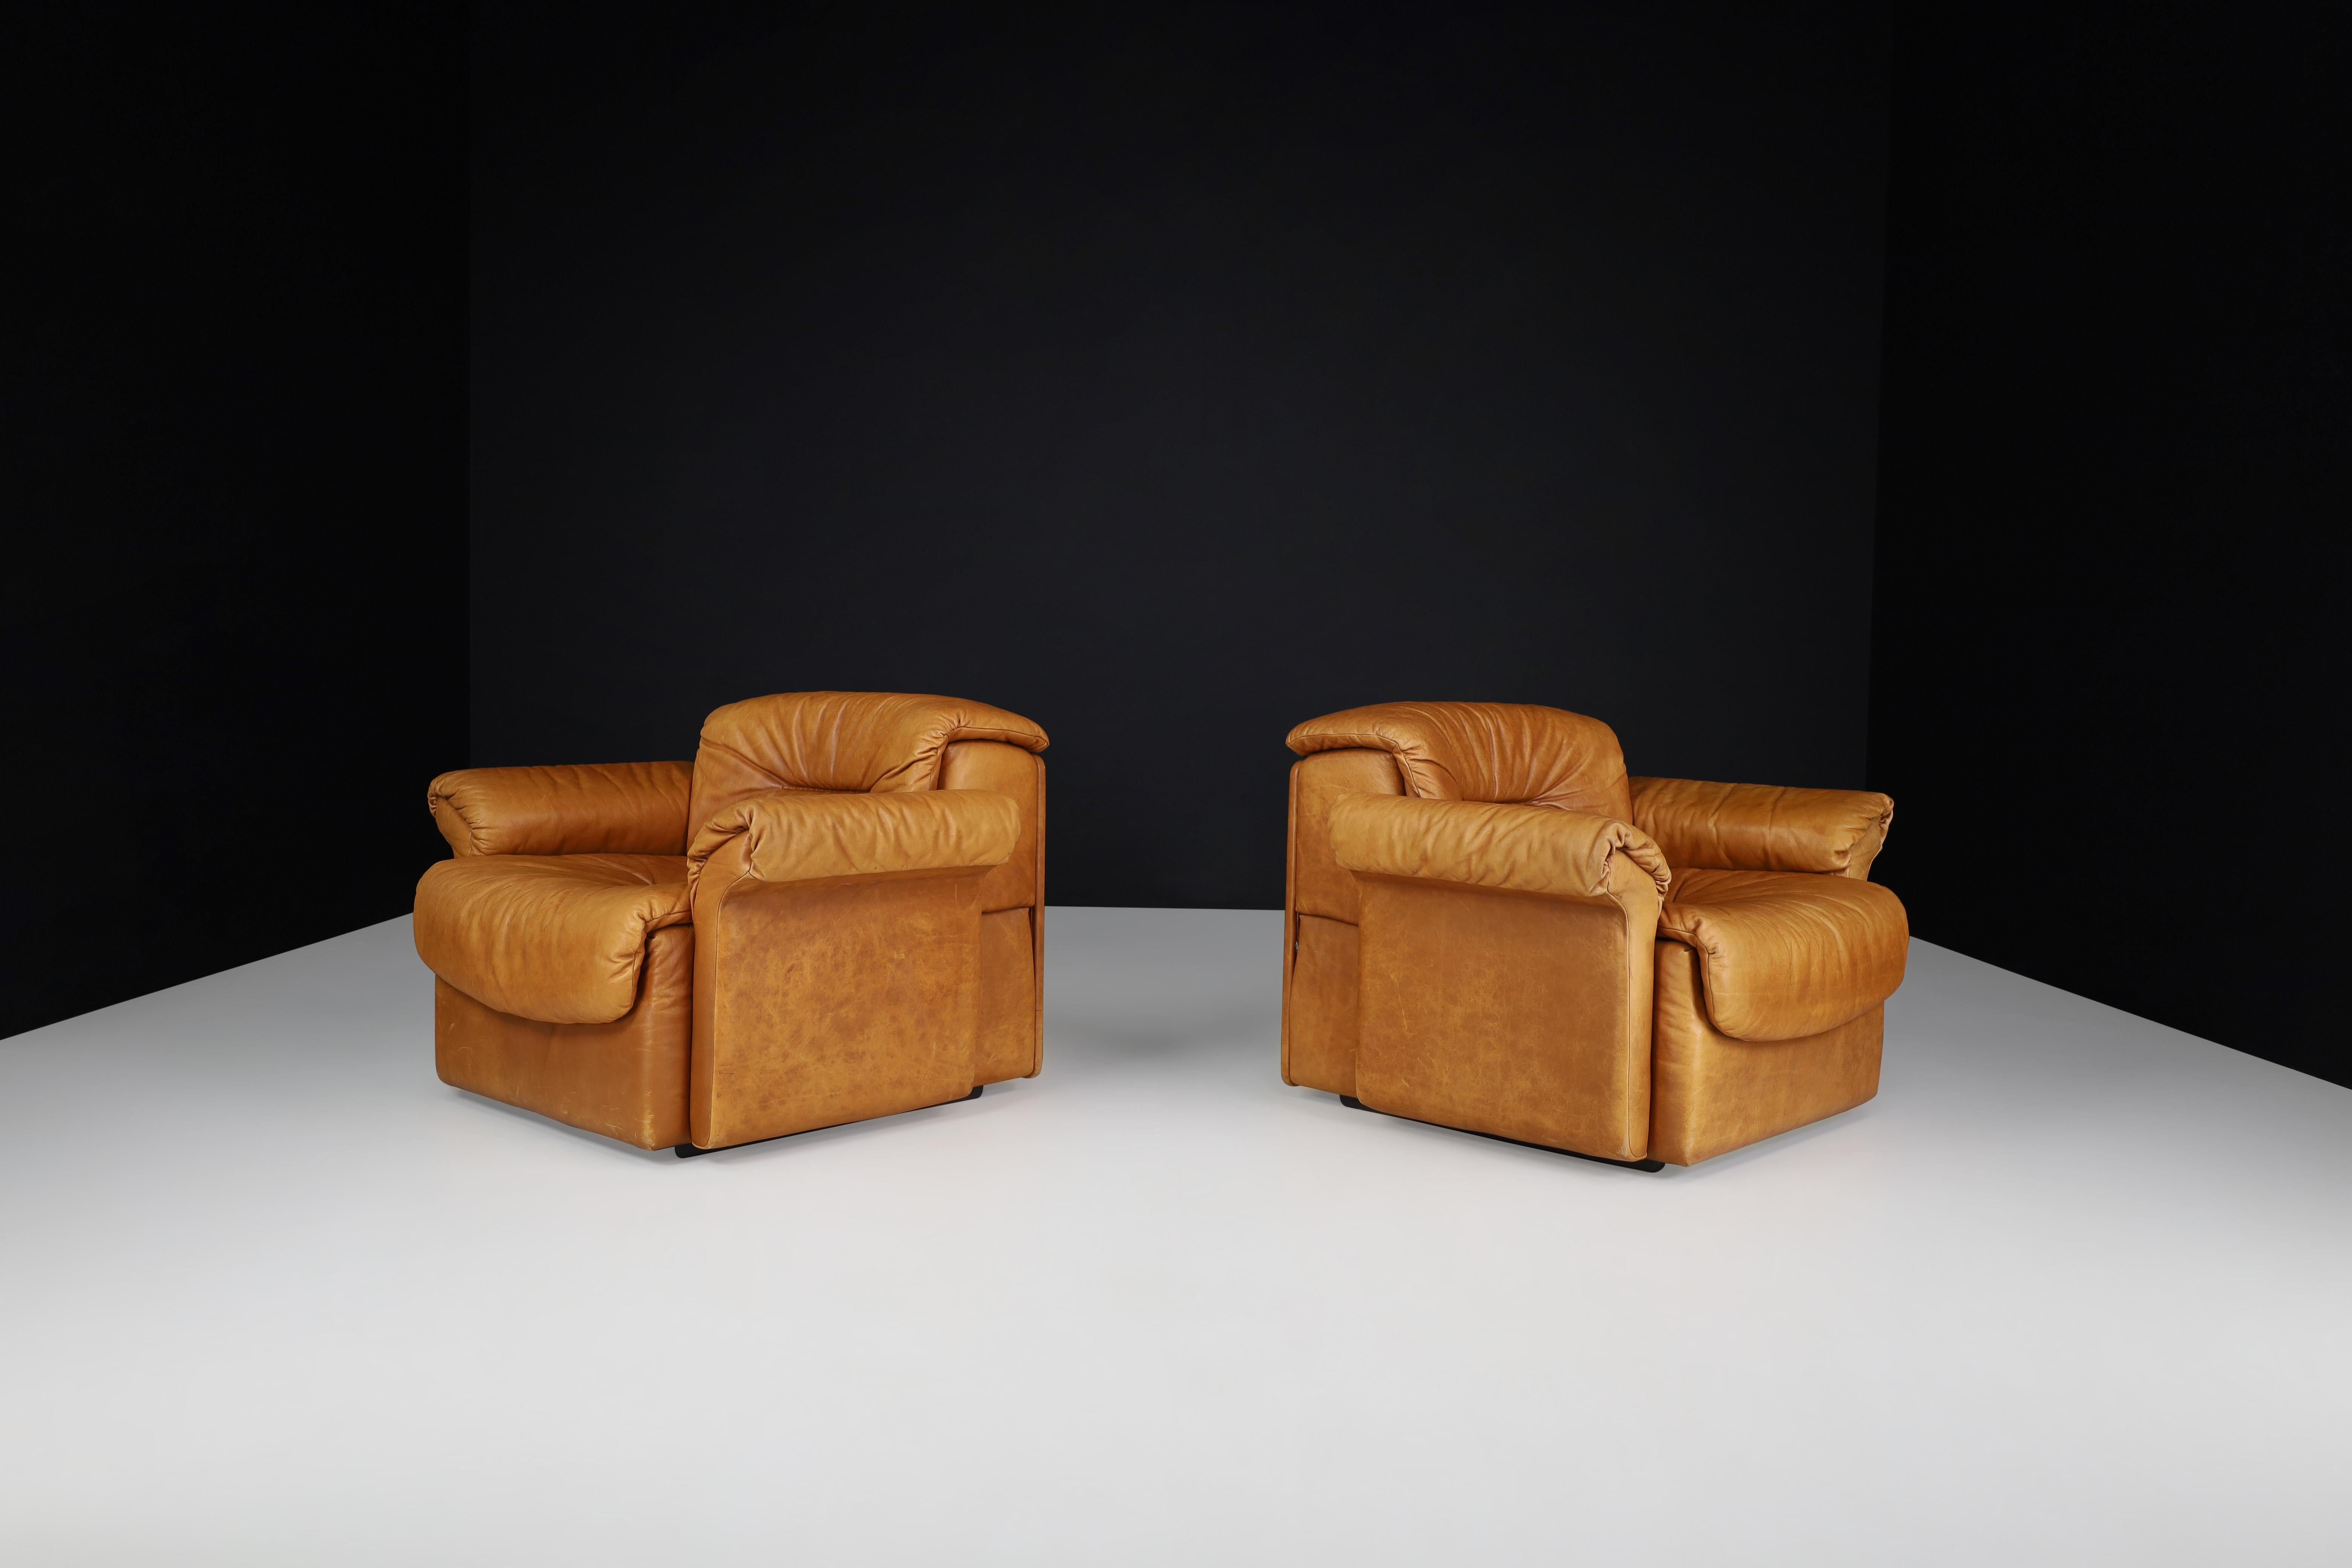 20th Century De Sede DS 14 Lounge Chairs in Patinated Cognac Leather, Switzerland, 1970s For Sale